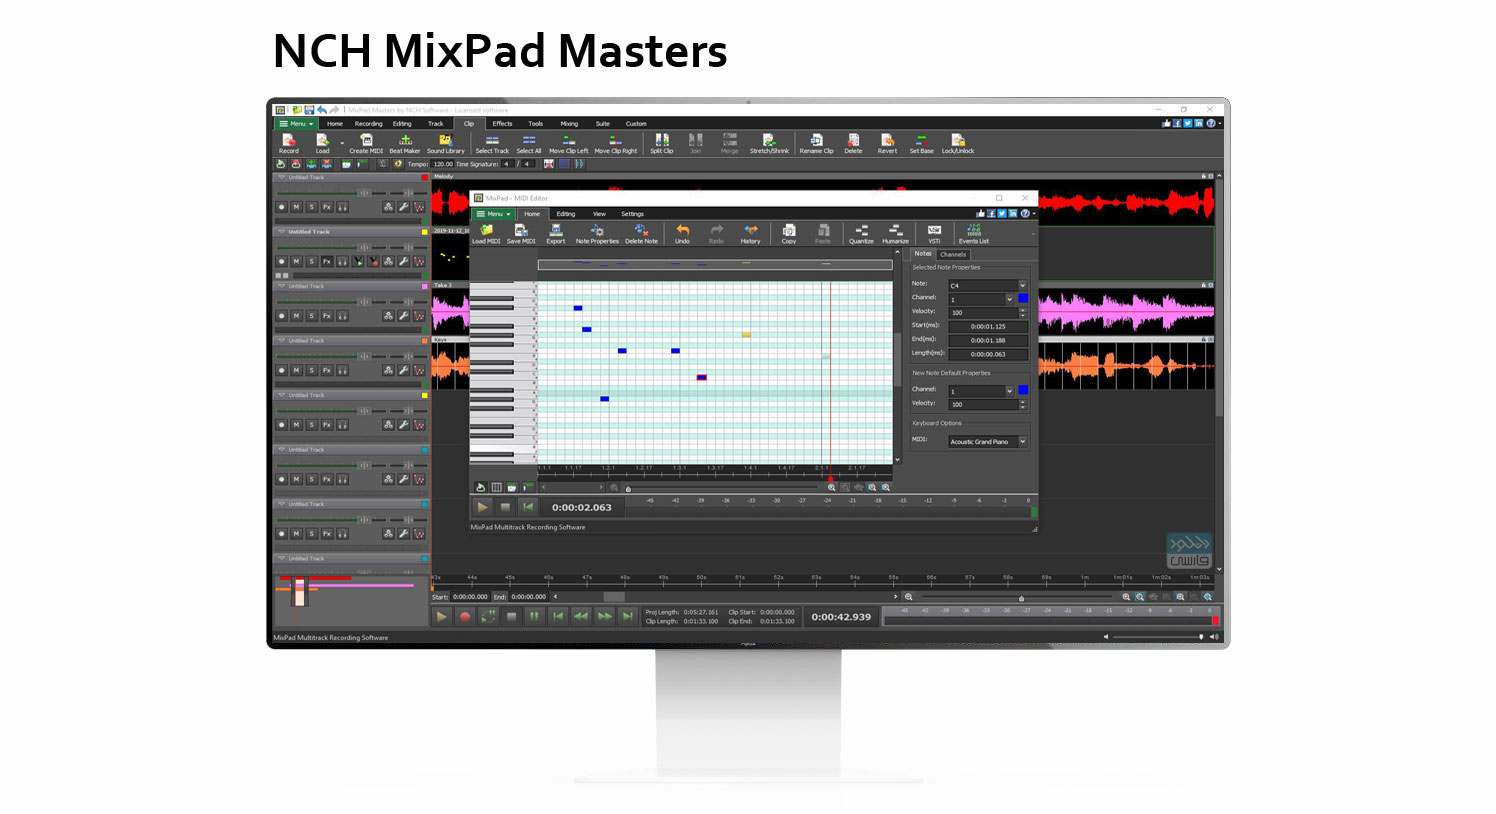 NCH MixPad Masters Edition 10.85 instal the last version for windows